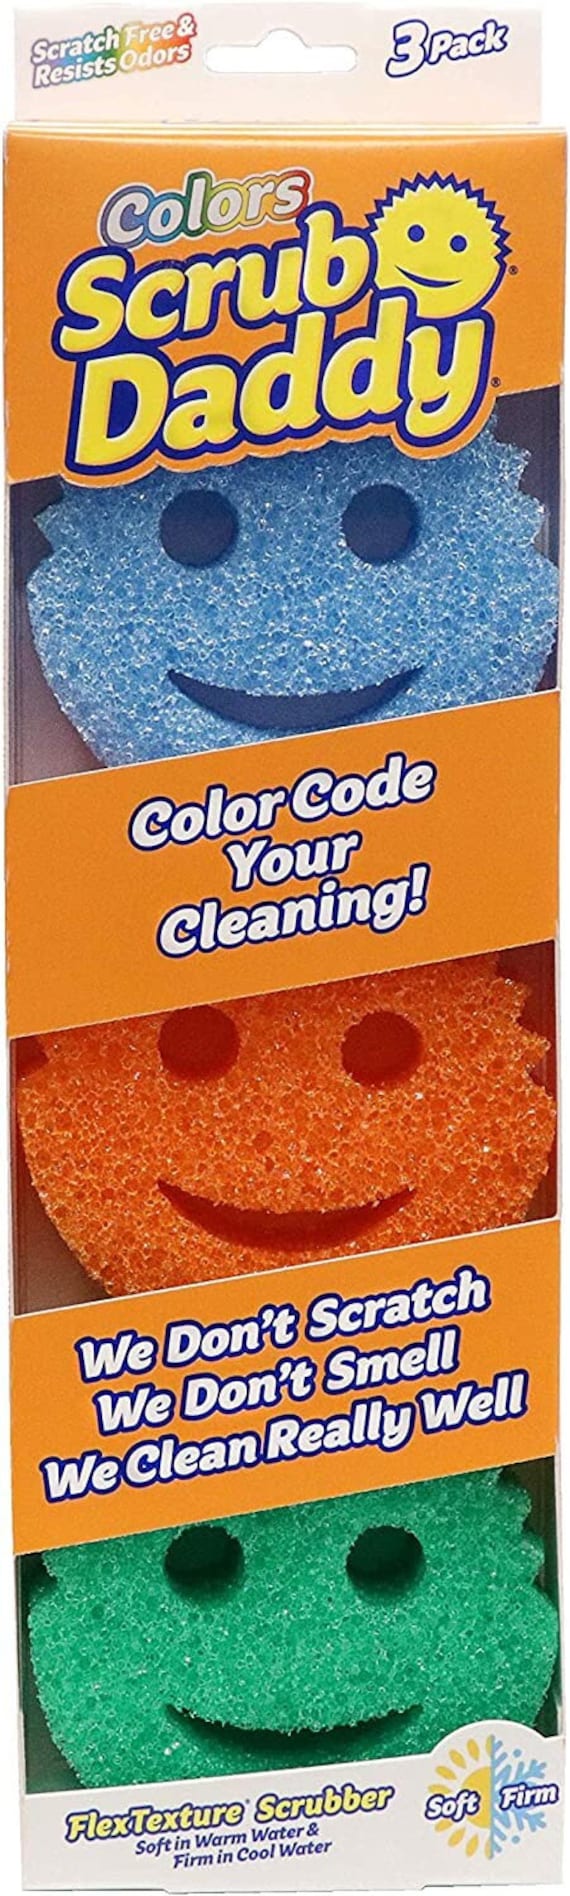 Scrub Daddy Scratch Free Cleaning Tool - Shop Sponges & Scrubbers